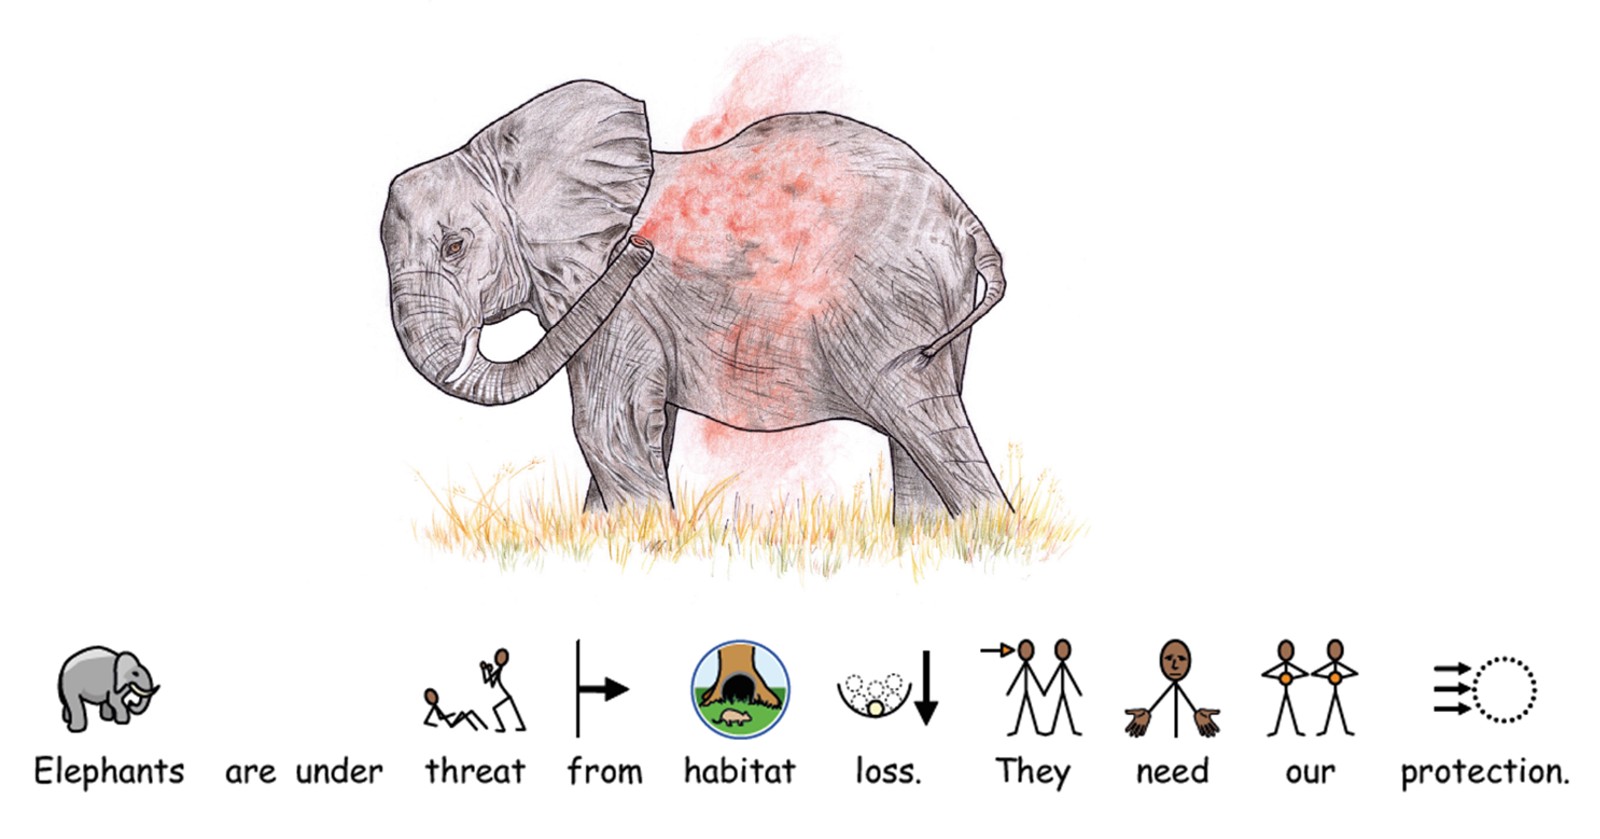 An illustration of an elephant taking a dust bath, with symbols explaining the image.